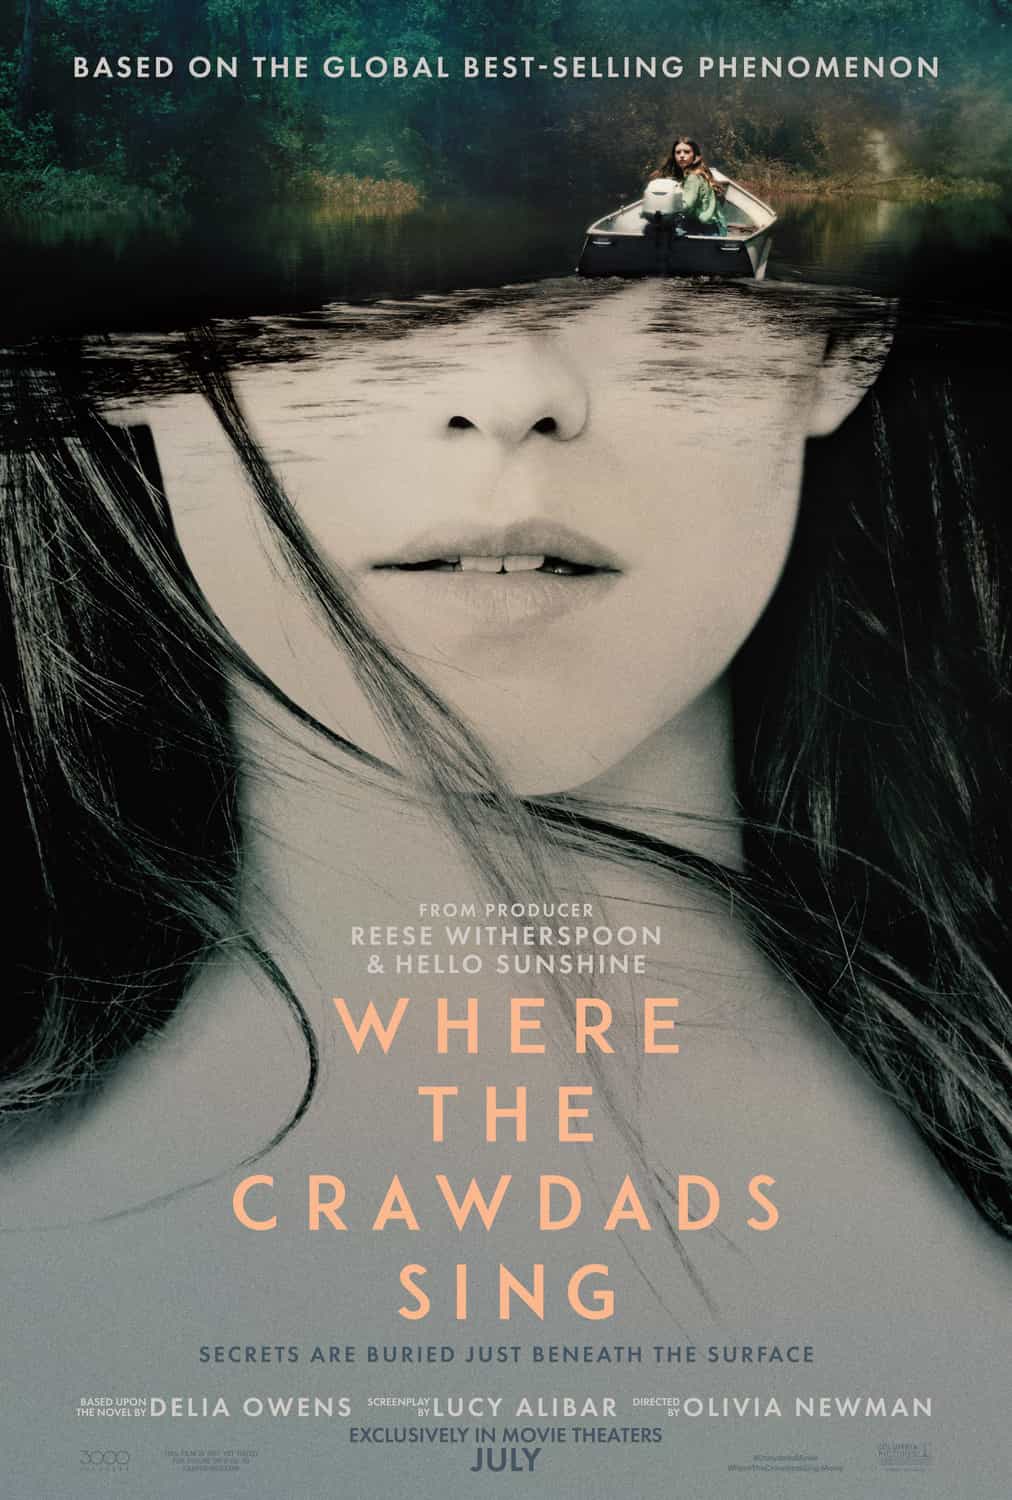 Where The Crawdads Sing is given a 15 age rating in the UK for sexual violence, domestic abuse